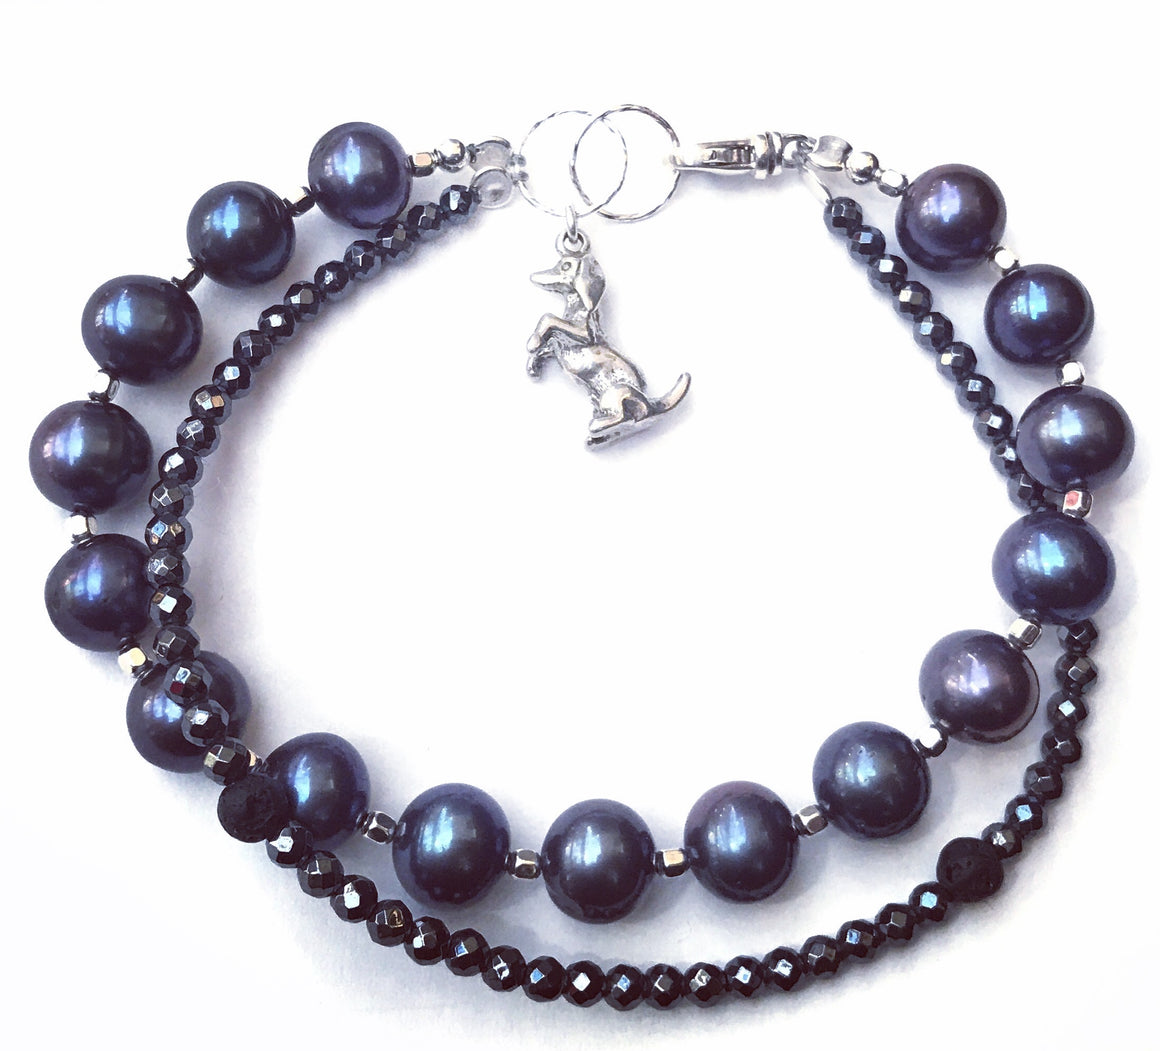 Double Bracelet Genuine Pearls with Black Hematite and Dog Sterling silver Bracelet